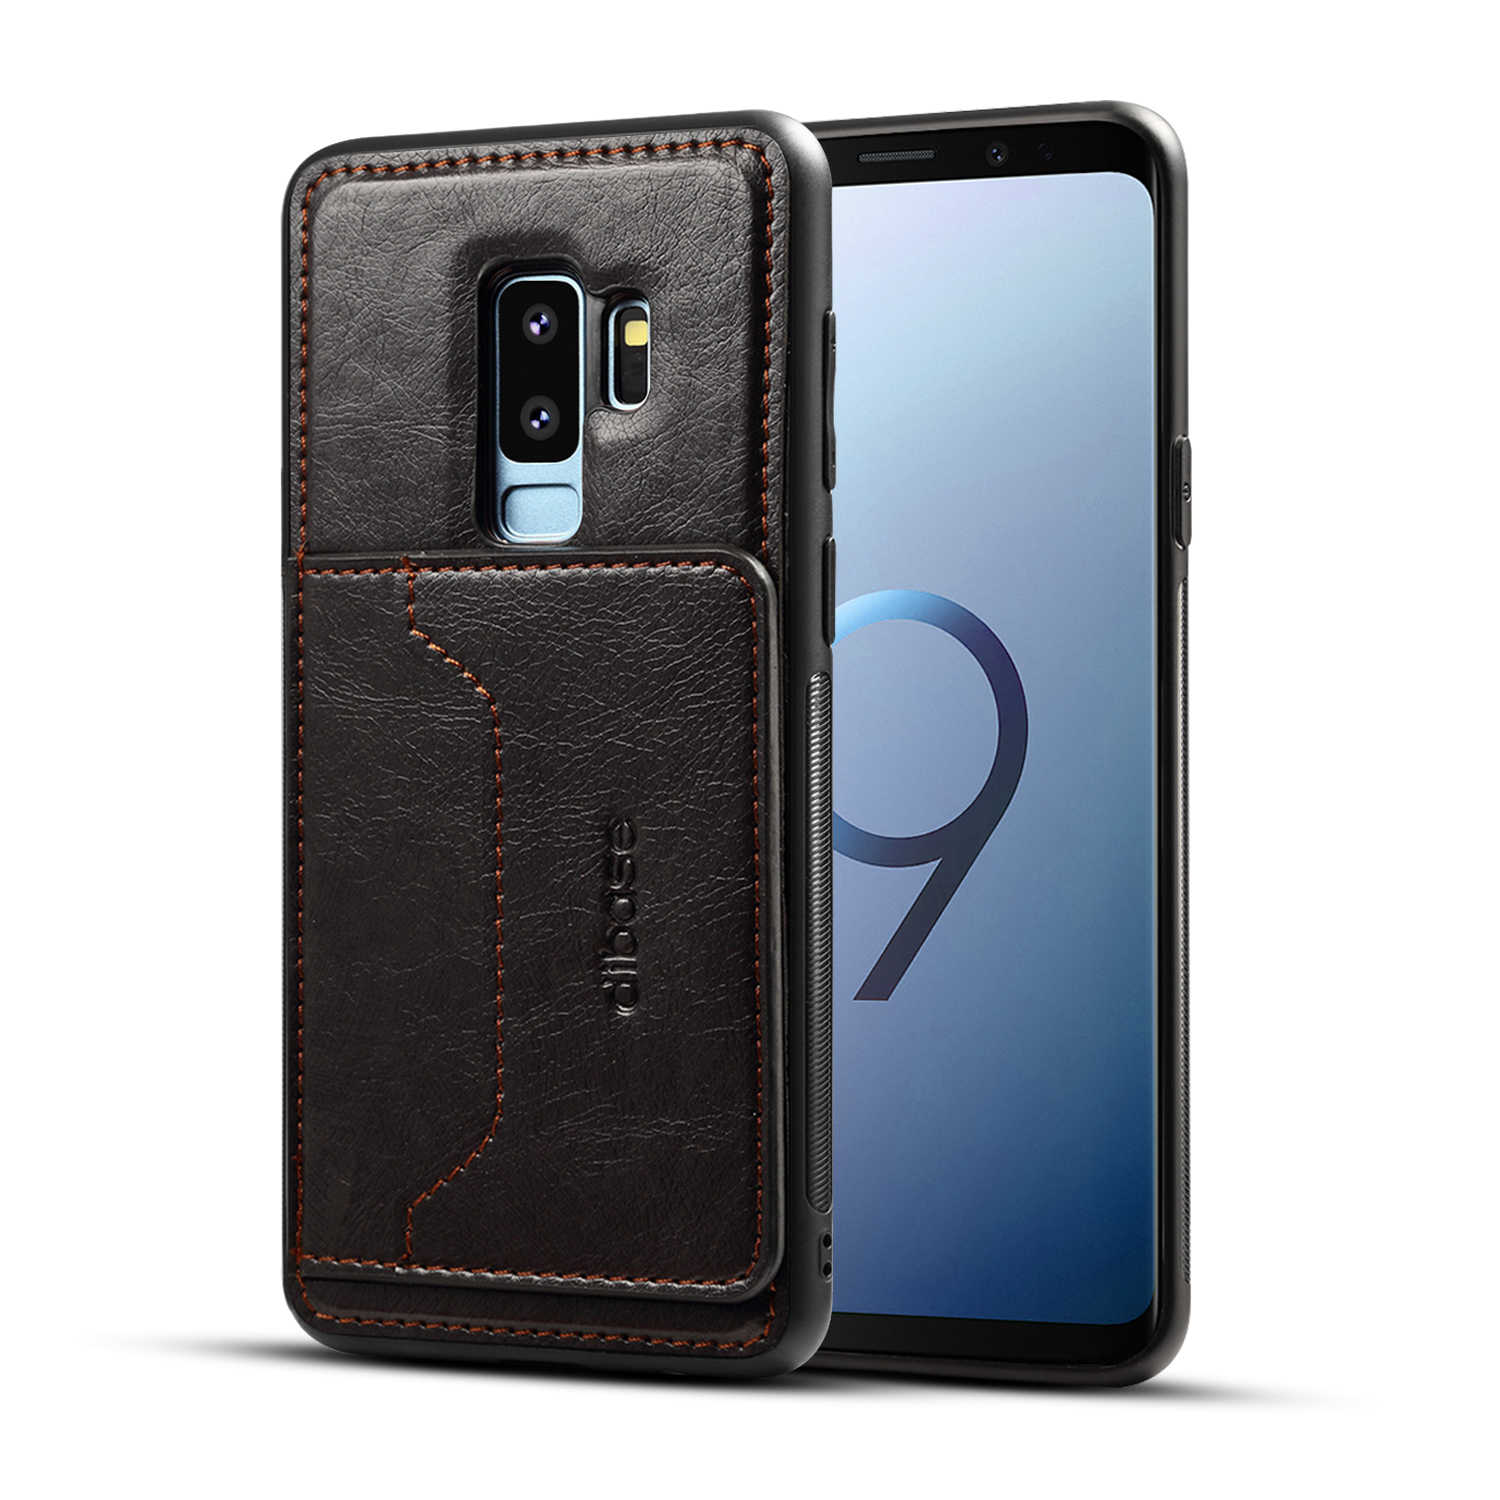 2-in-1-PU-Leather-Card-Slot-Bracket-Protective-Case-for-Samsung-Galaxy-S9-Plus-1293600